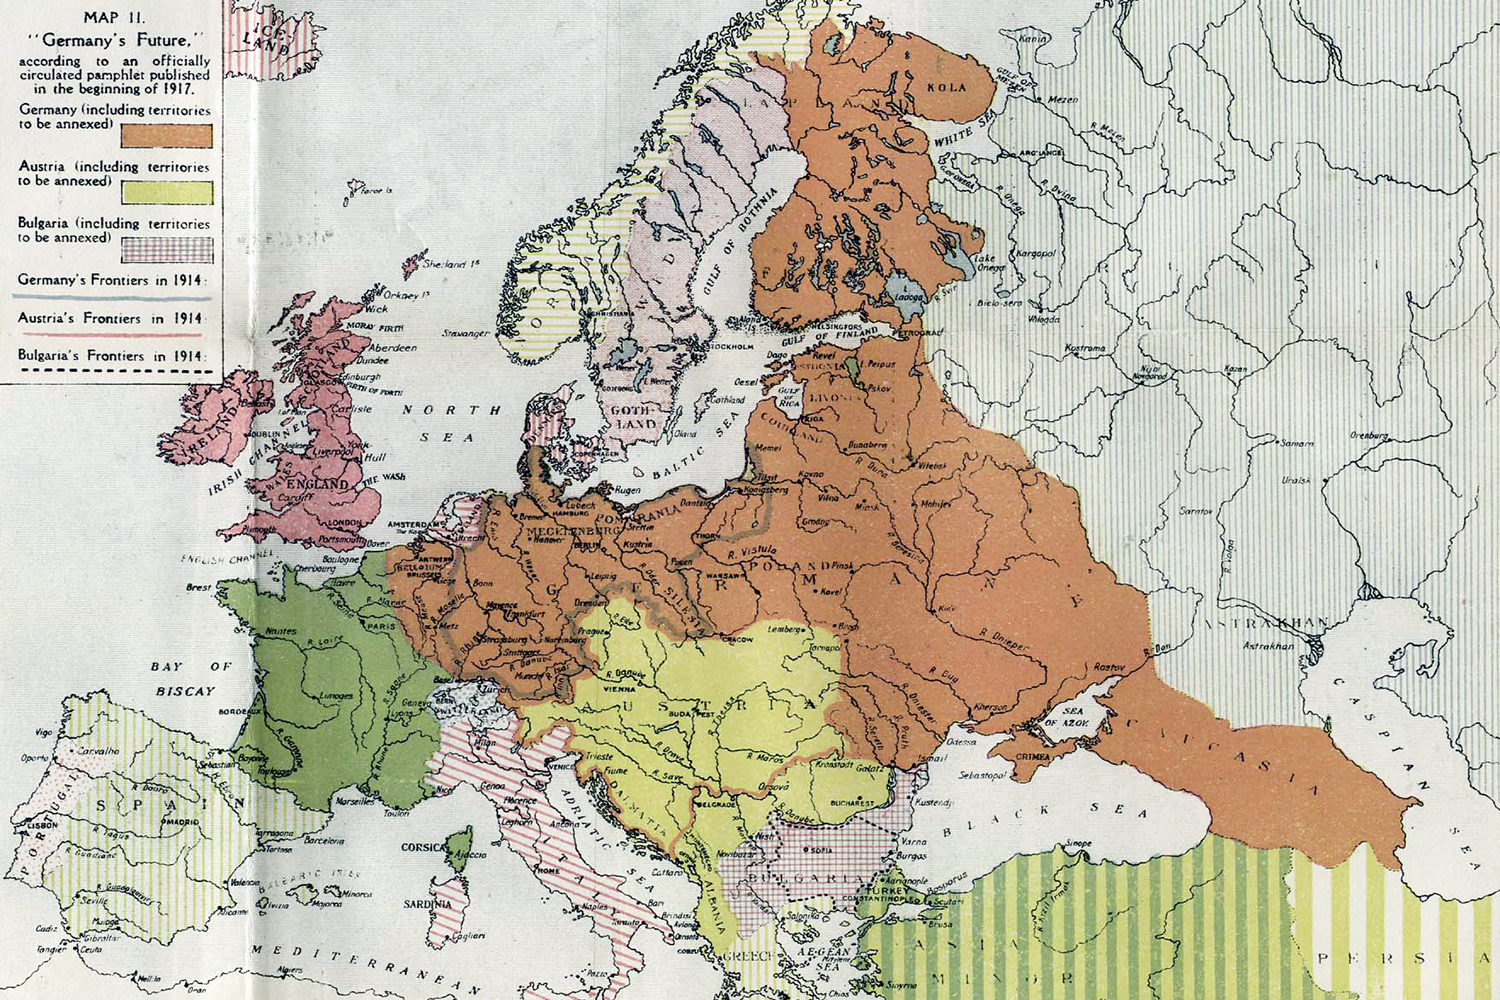 Germany's Future 1917 map